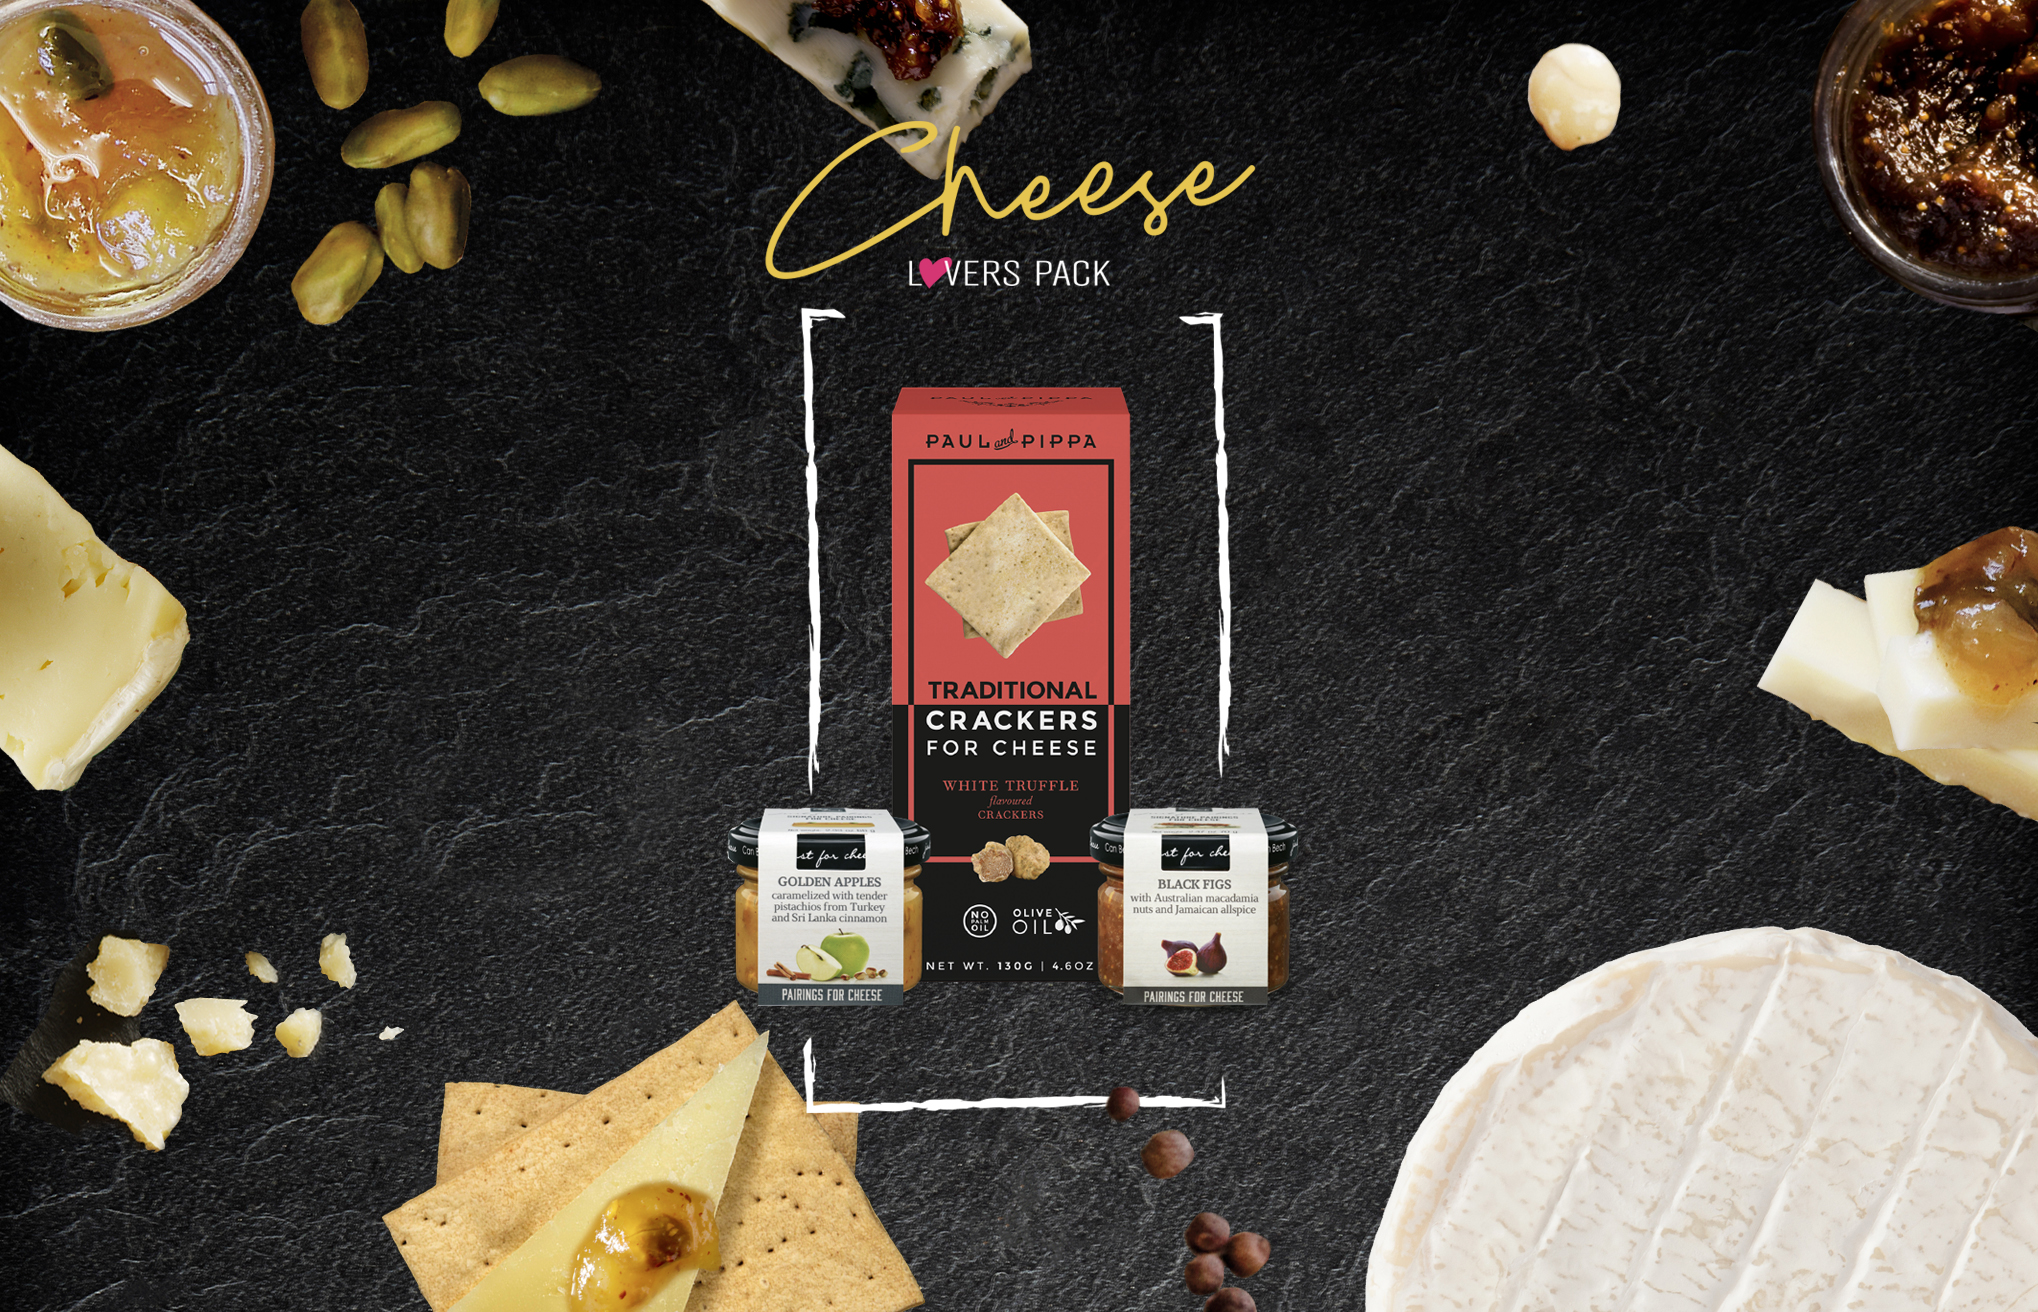 cheese lovers